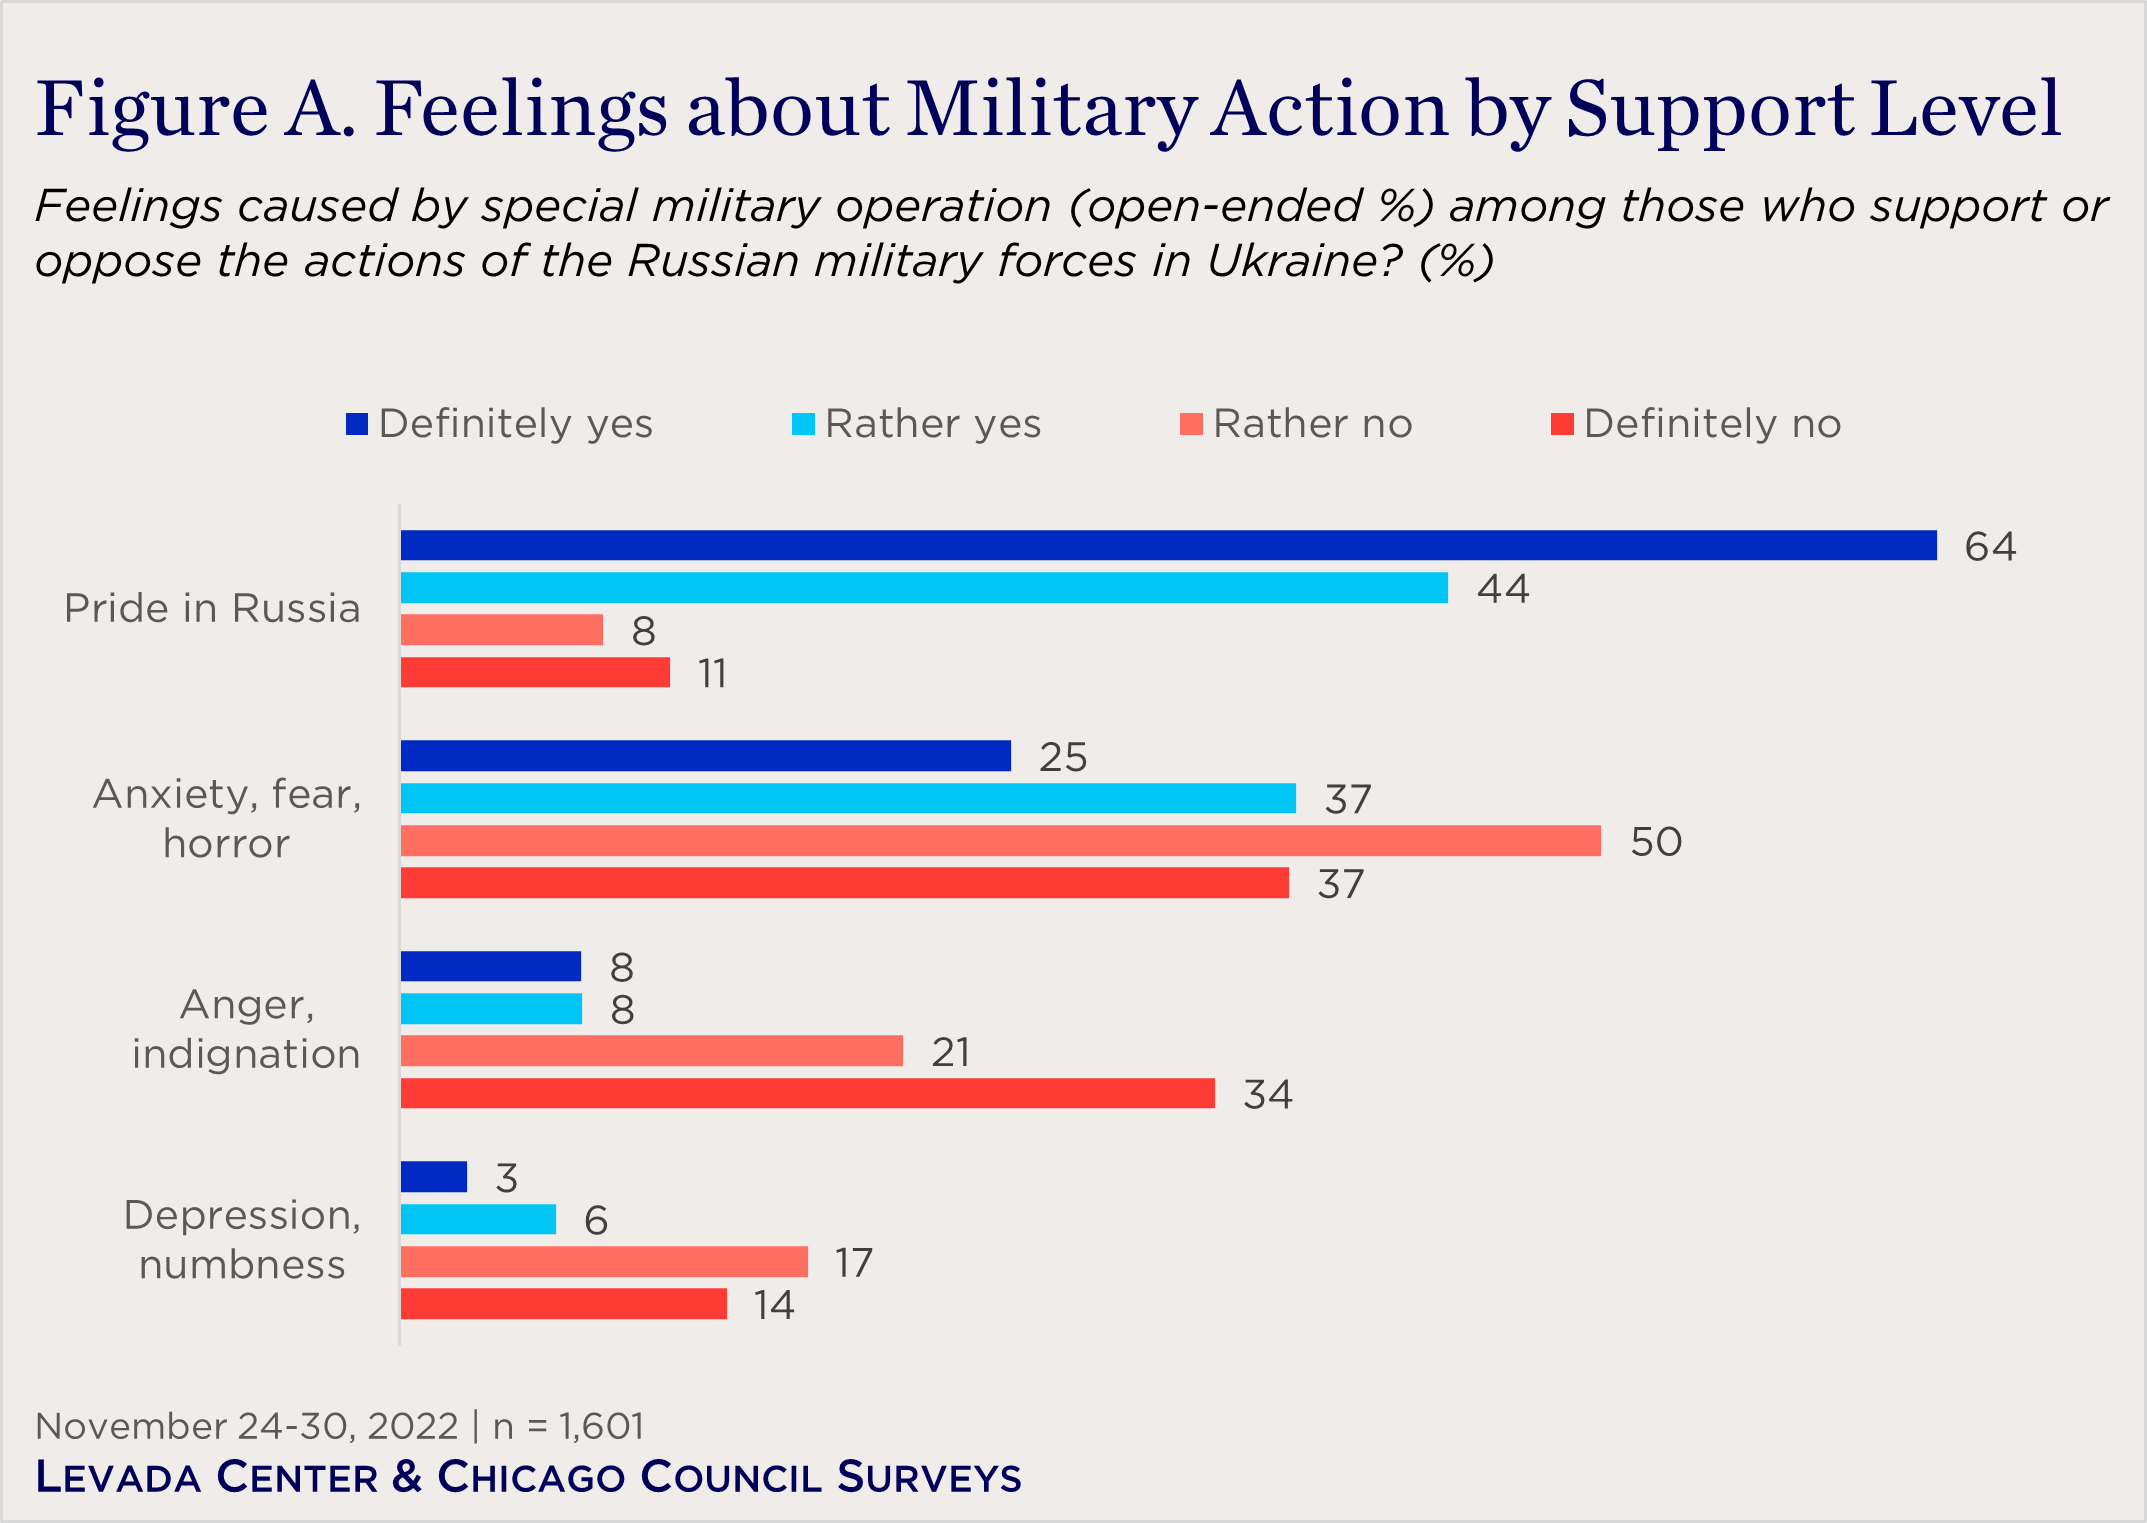 "bar chart showing feelings about military action by support level"